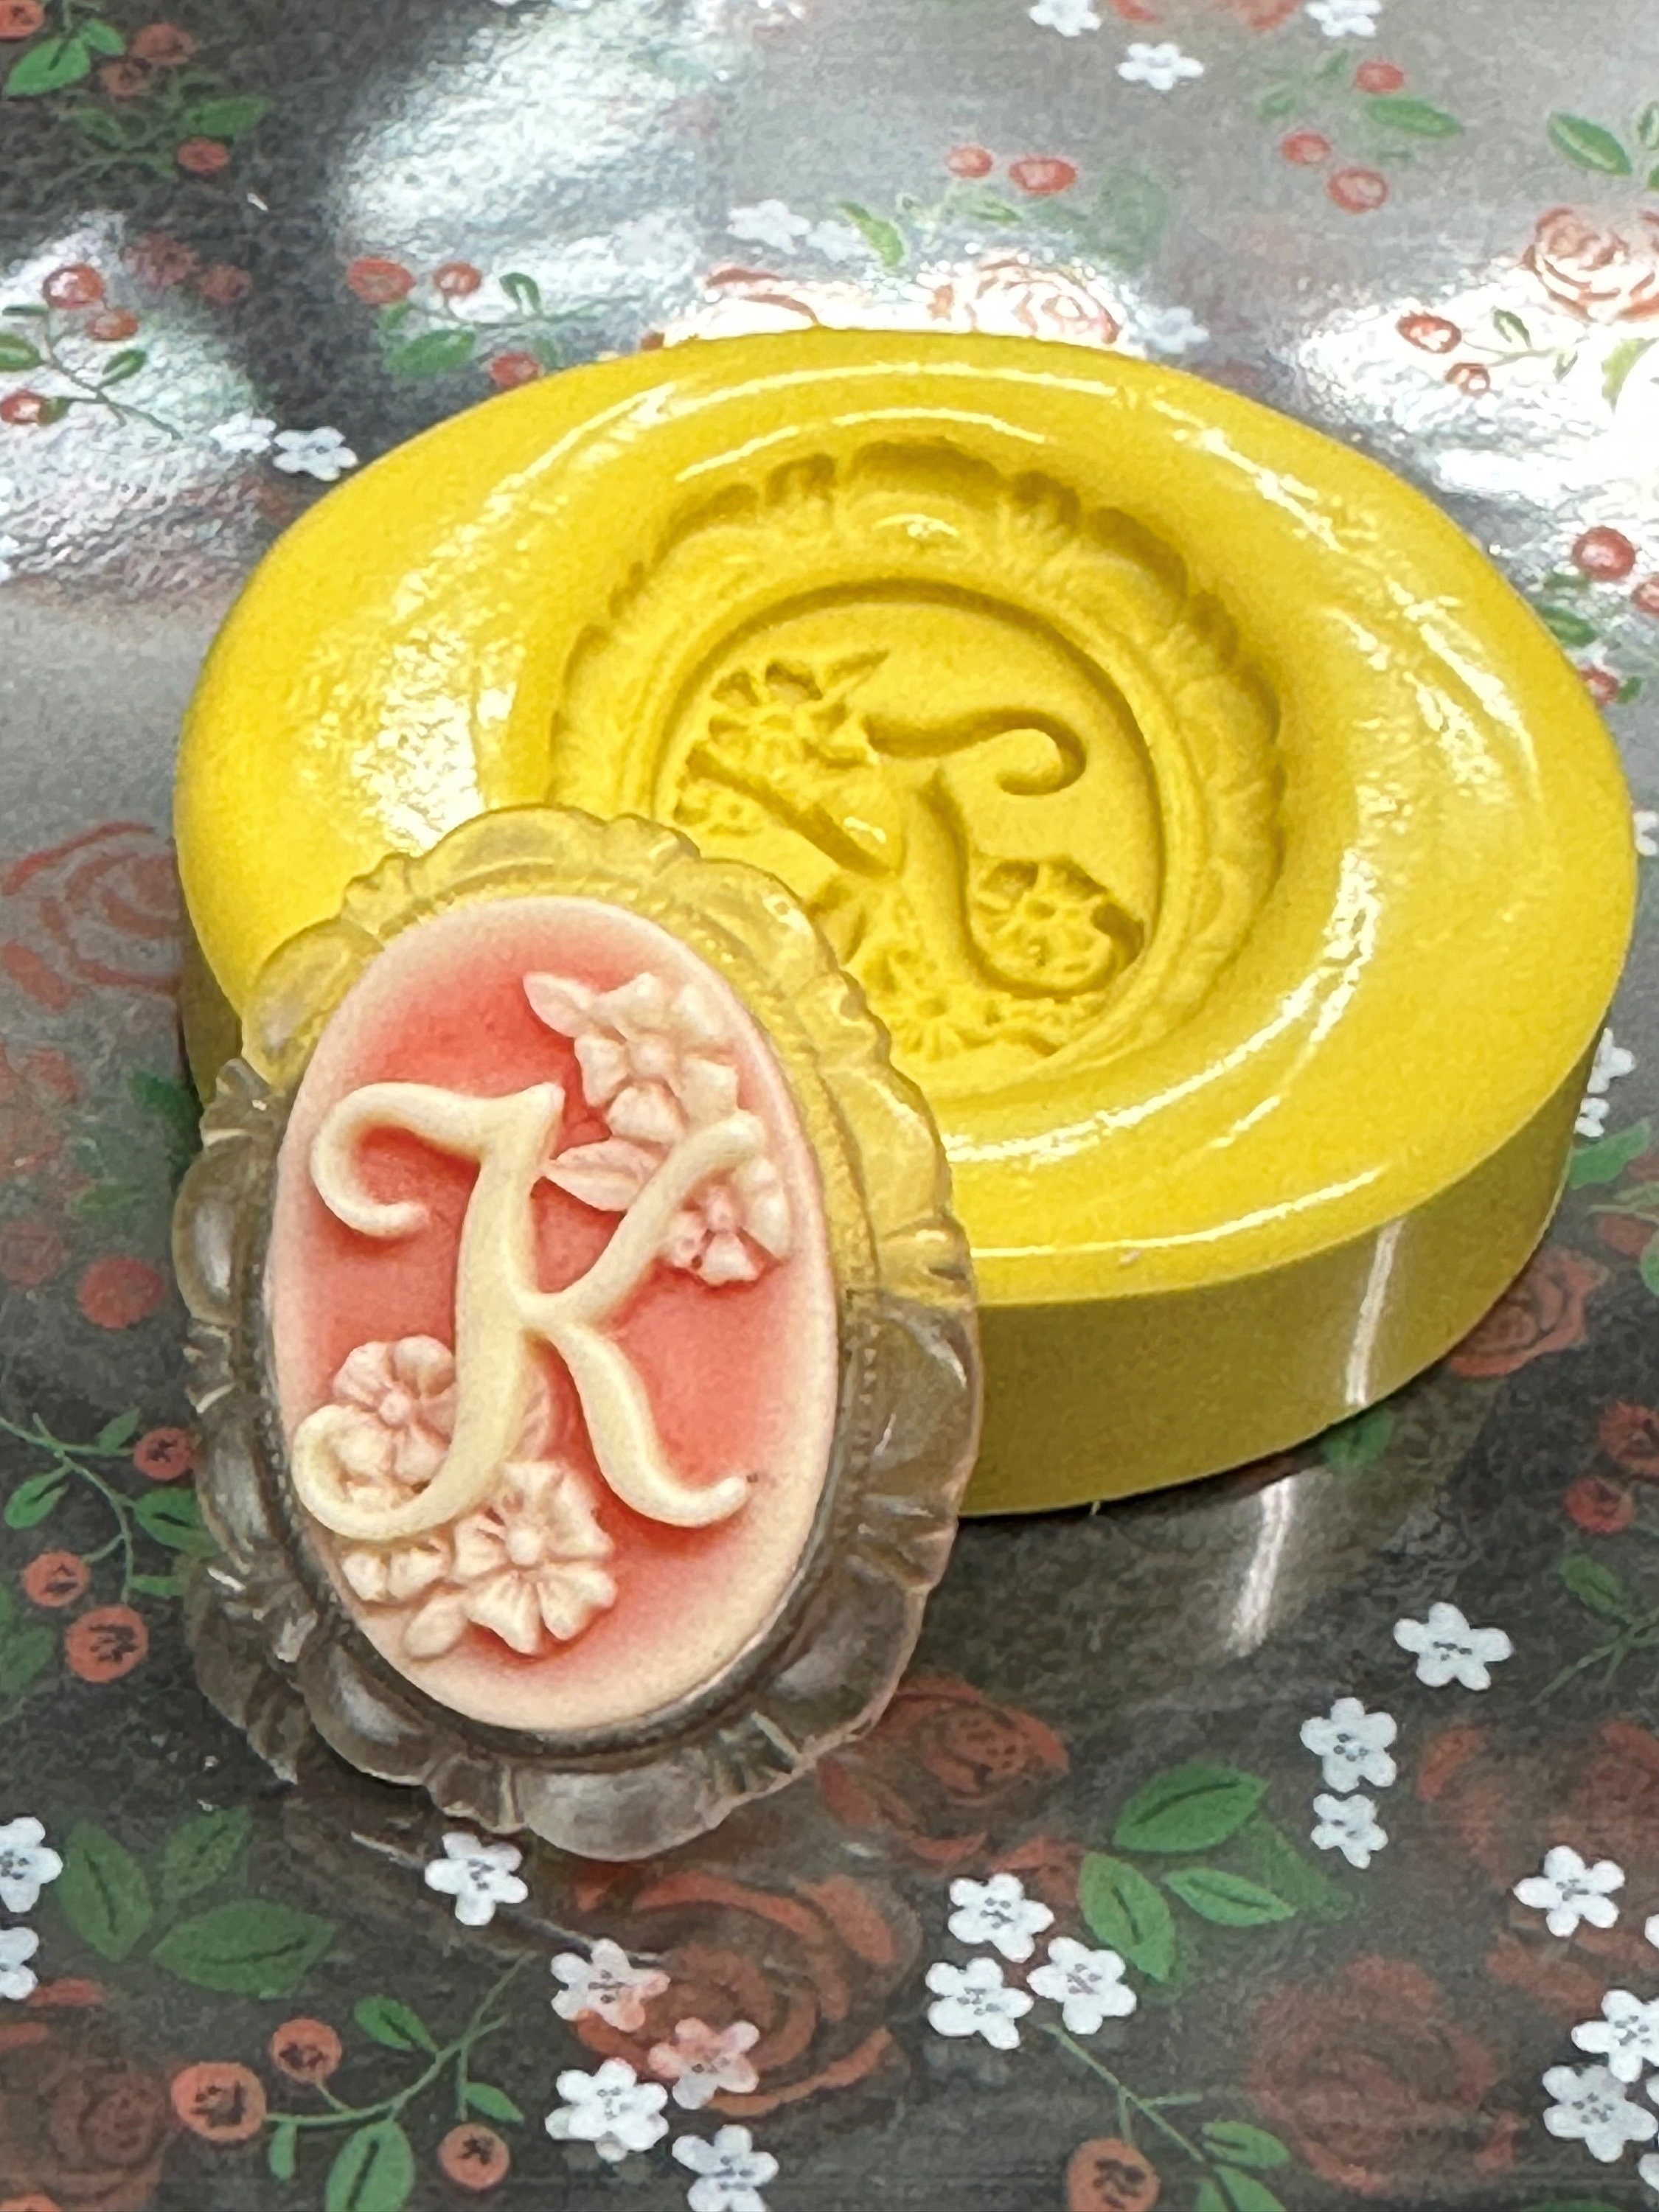 Unique, signature butter molds make impression on customers